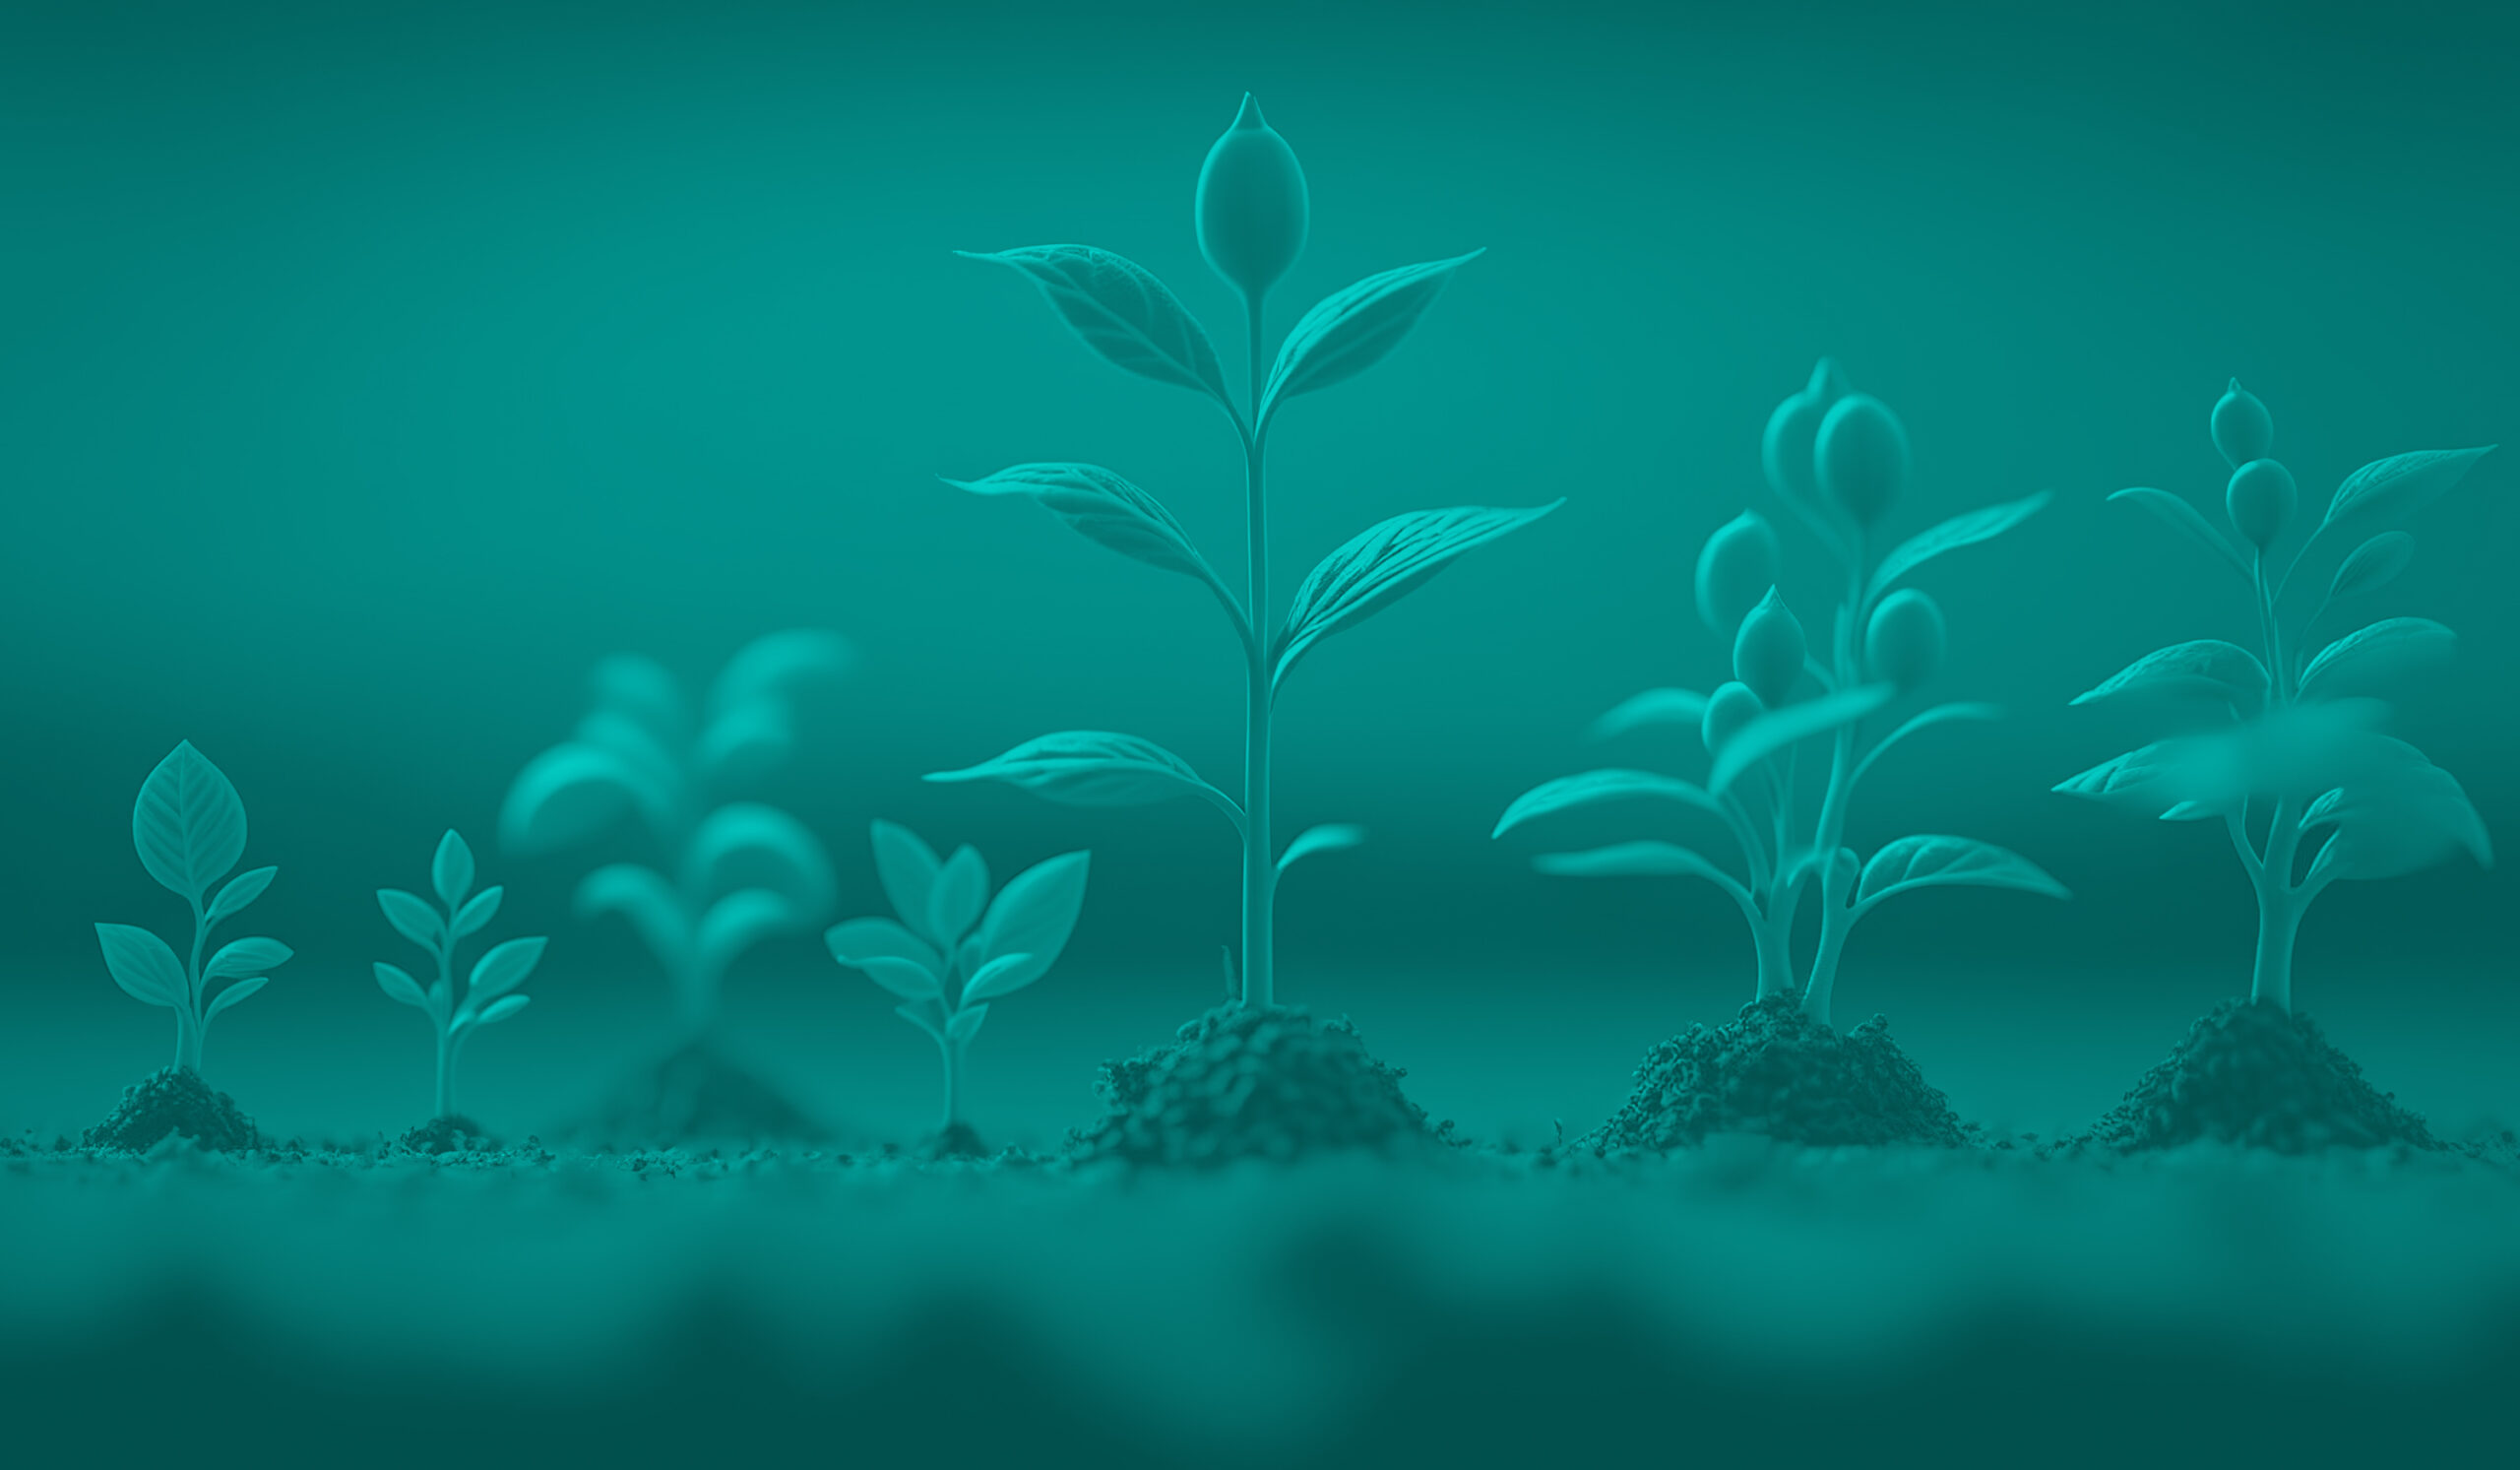 Blog feature image consisting of plants in a row growing at various intervals abstractly representing growth and nurturing from a customer service representative